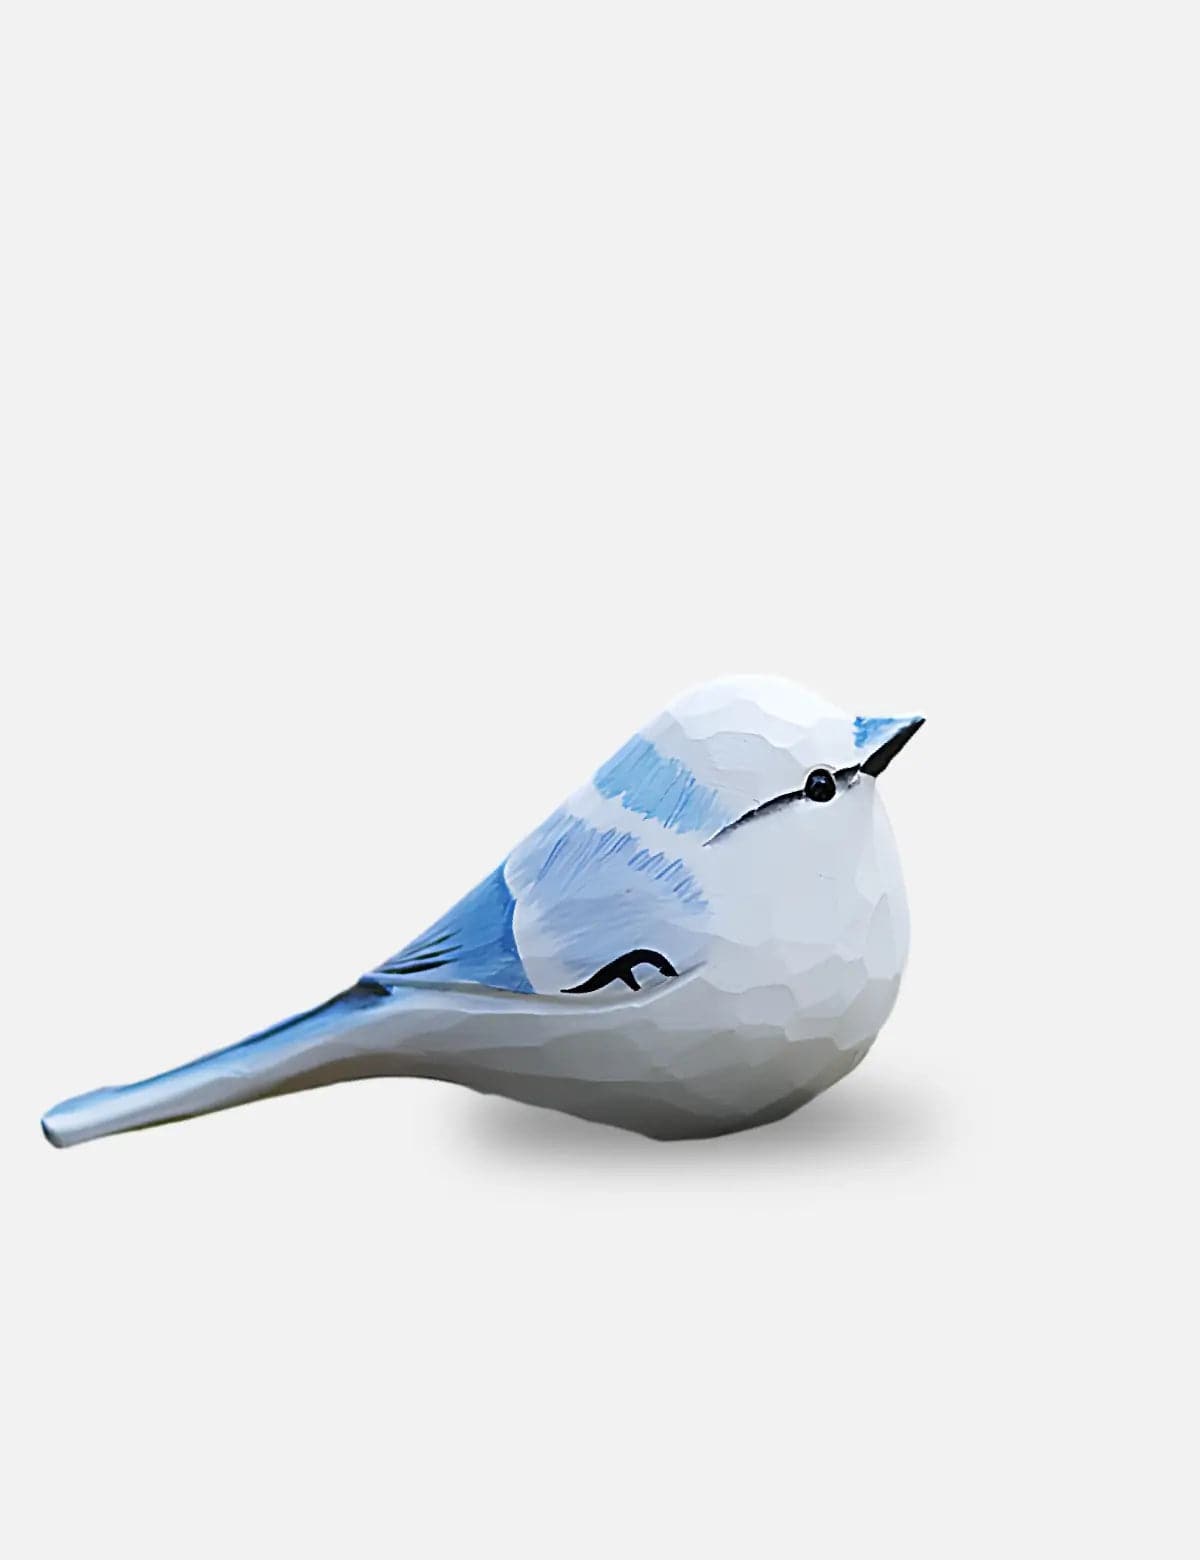 Artisan-Crafted-Cyan-Titmouse-Wood-Statuette-01